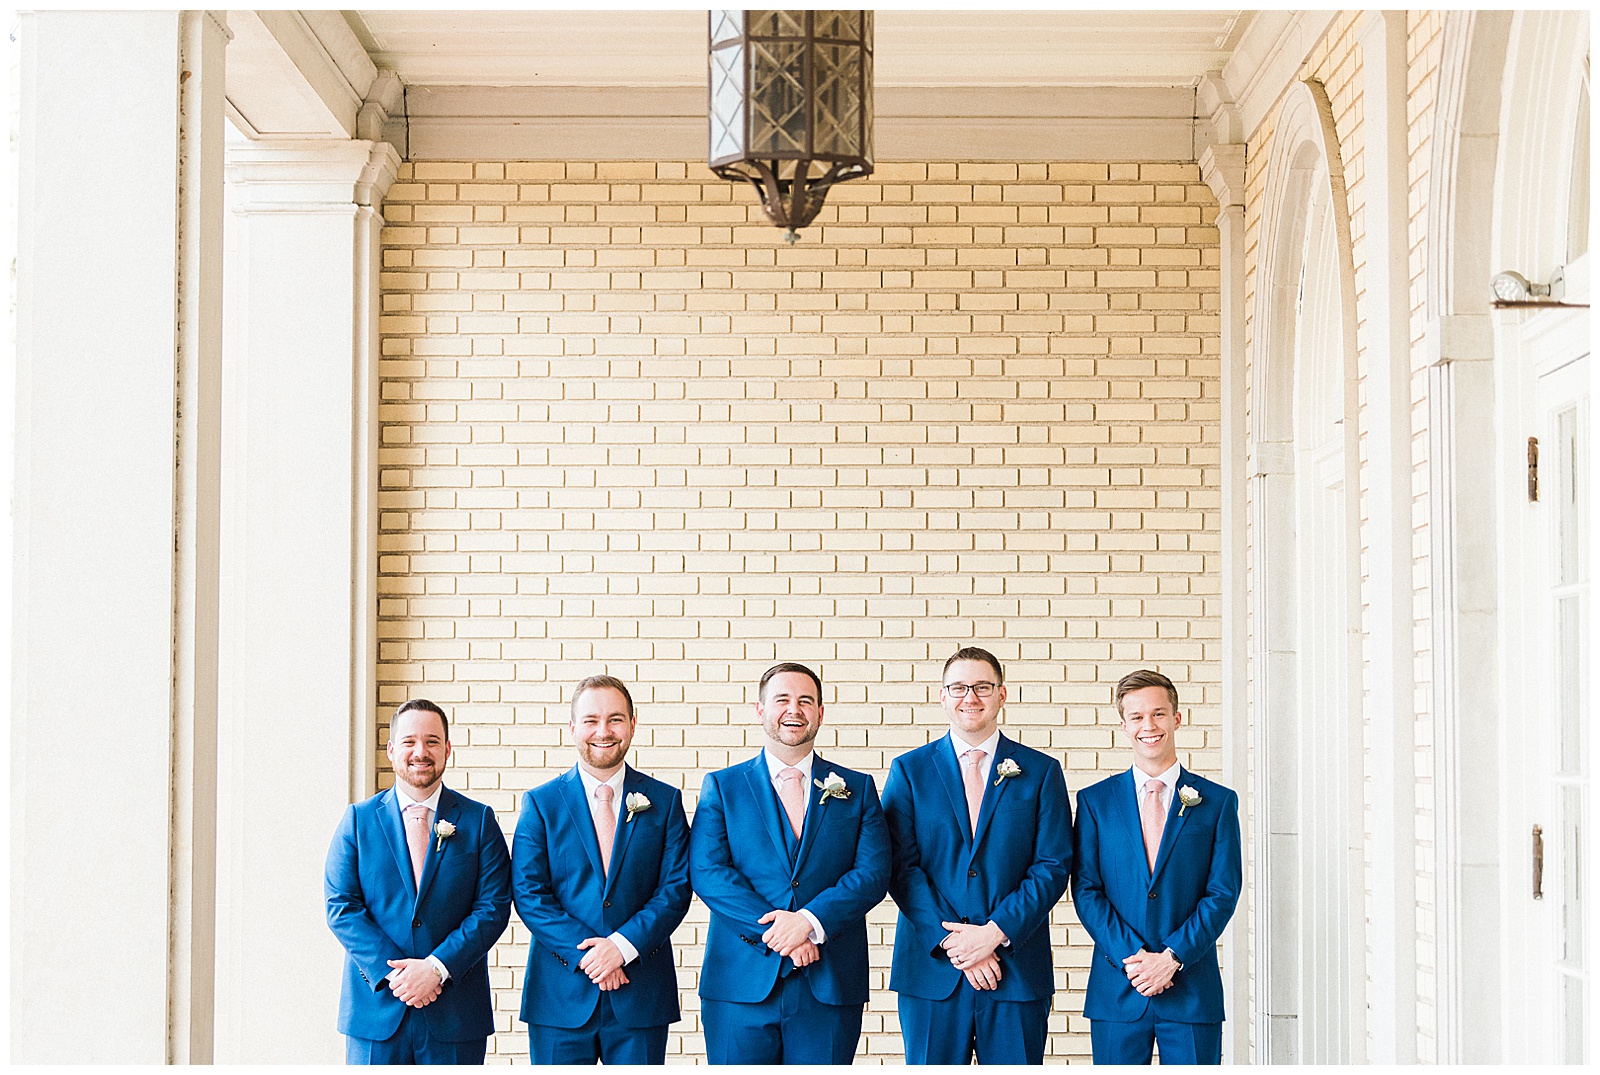 Sharp-Looking Groomsmen Navy Blue Pink Tie Outfit Ideas from Light and Airy Outdoor Wedding at Separk Mansion in Gastonia, NC | Kevyn Dixon Photography